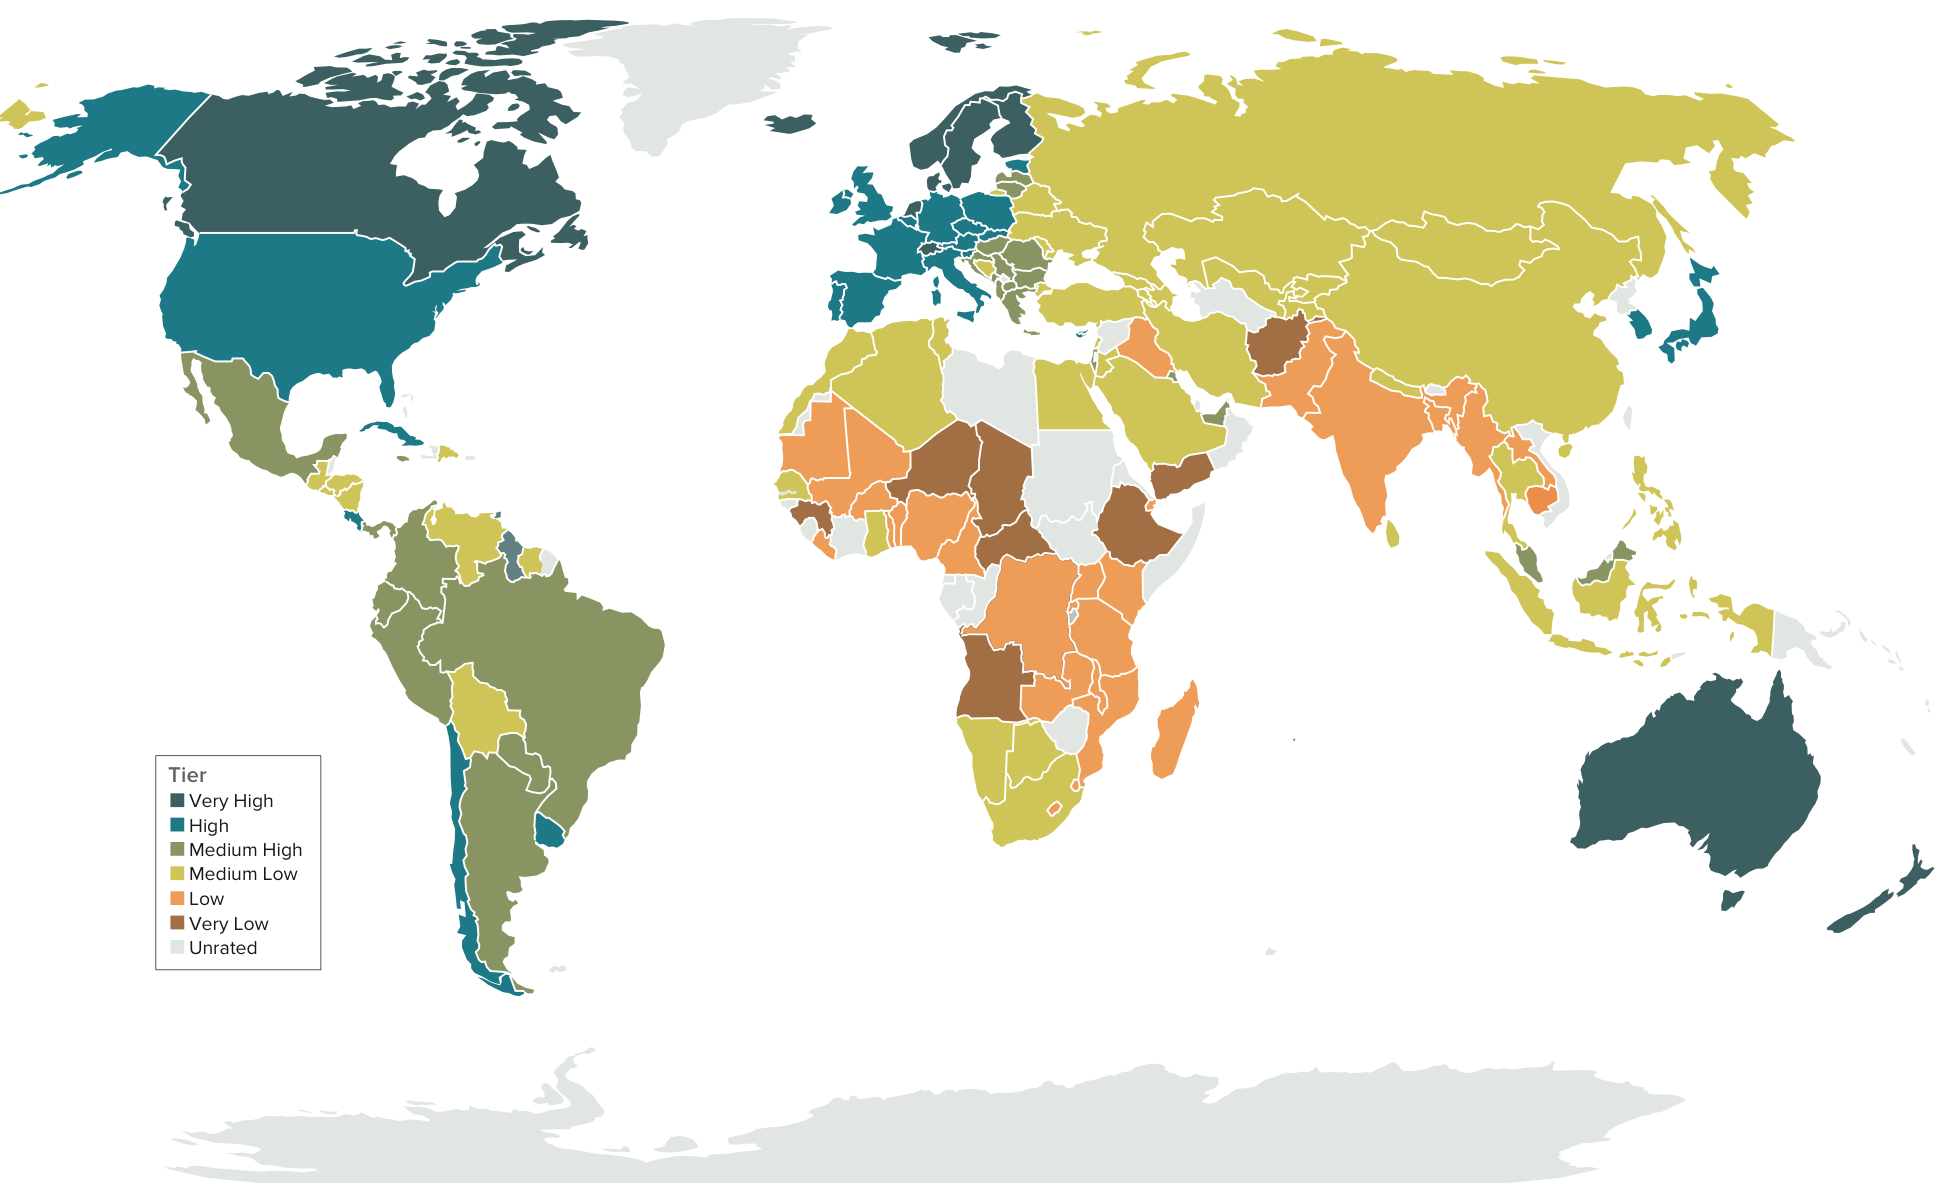 Social-Progress-Index-scores-by-tiers_map (1)